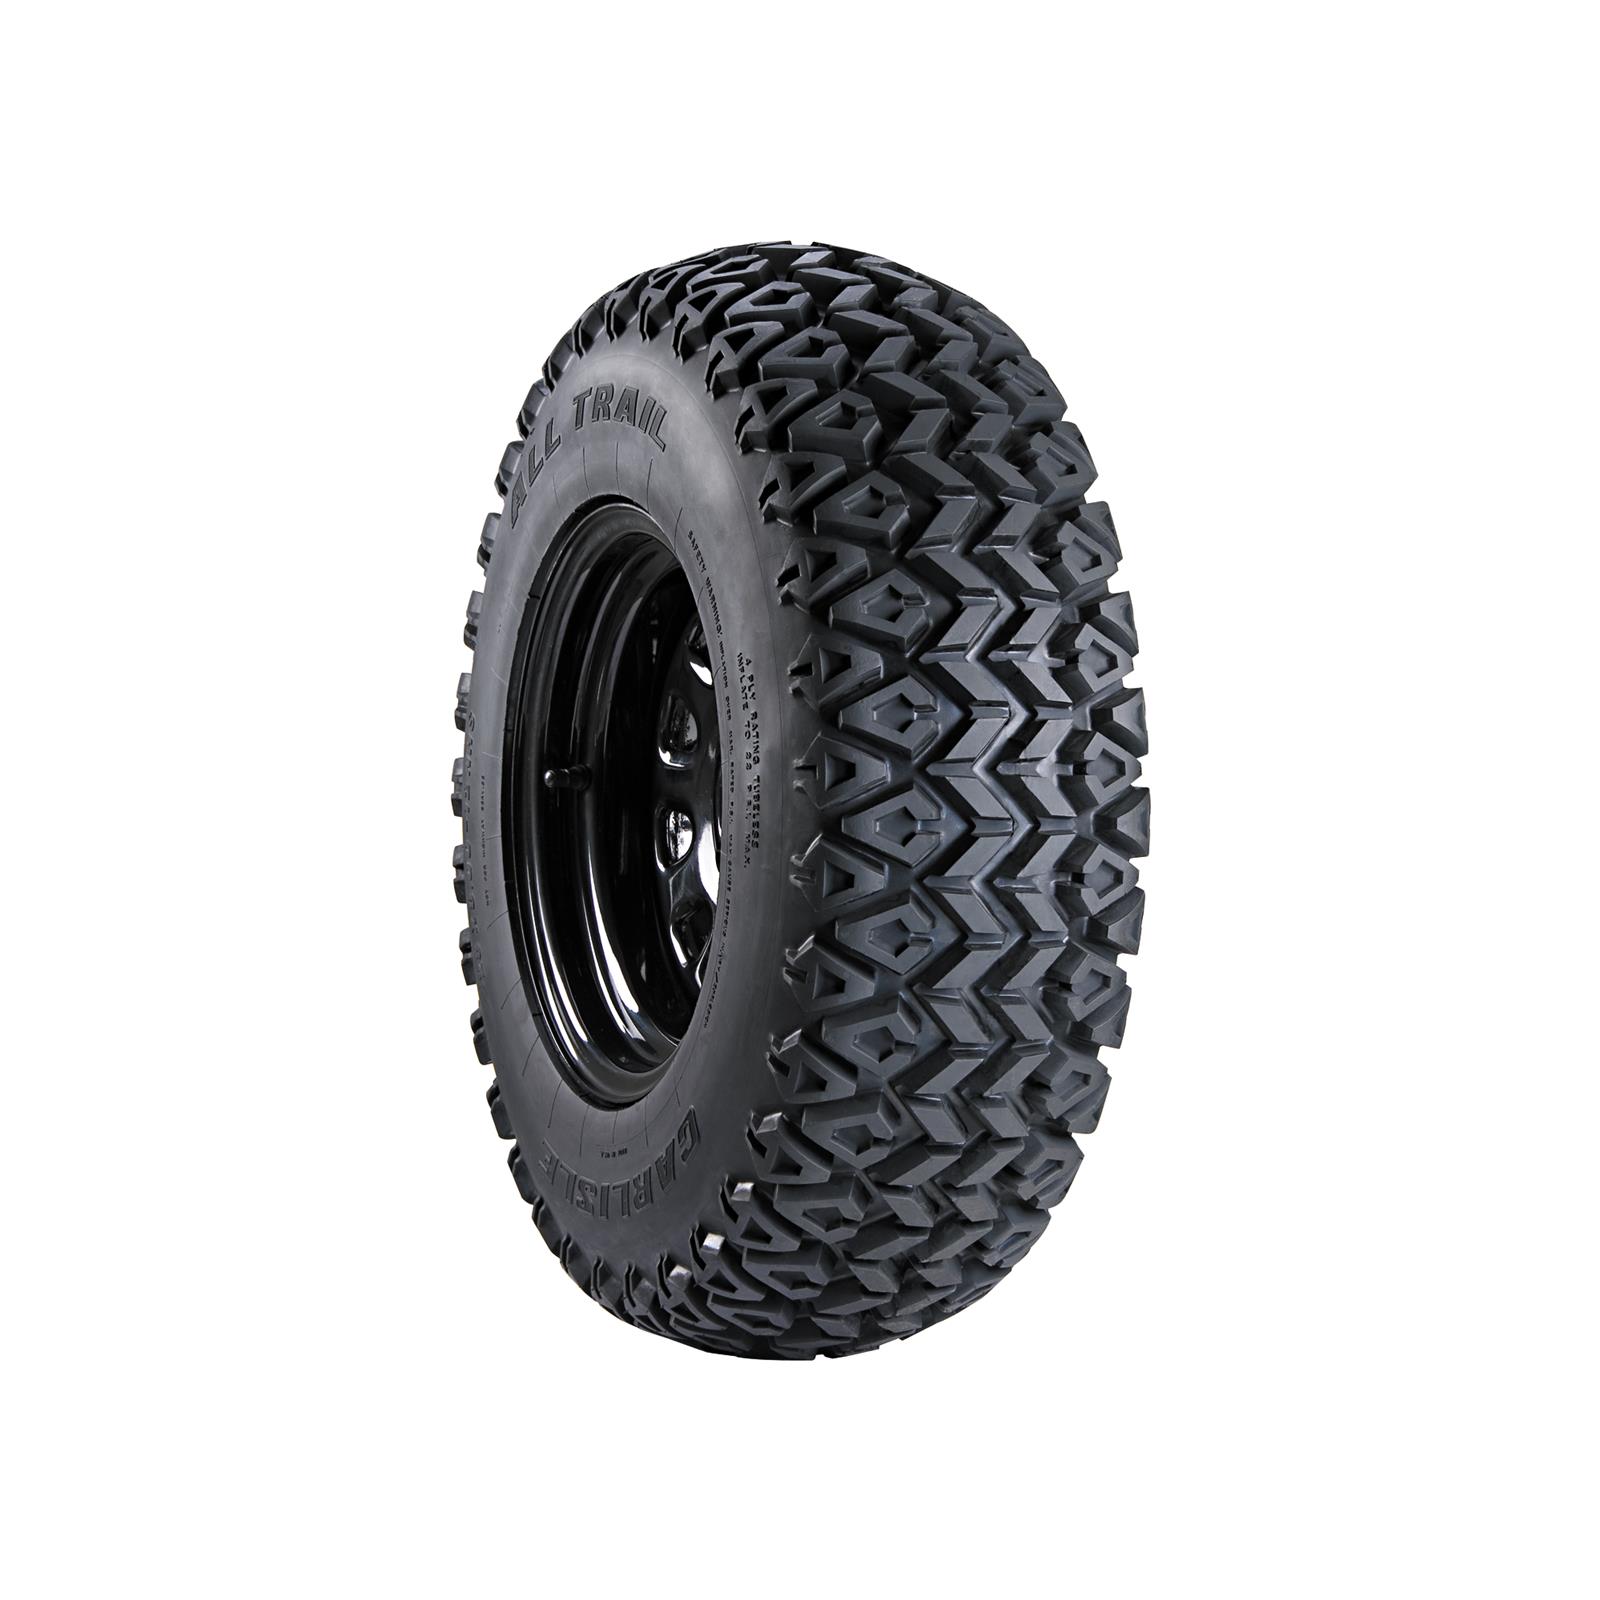 All Trail 4 Ply Bias Front Tire 23 x 10.5-12 - Click Image to Close